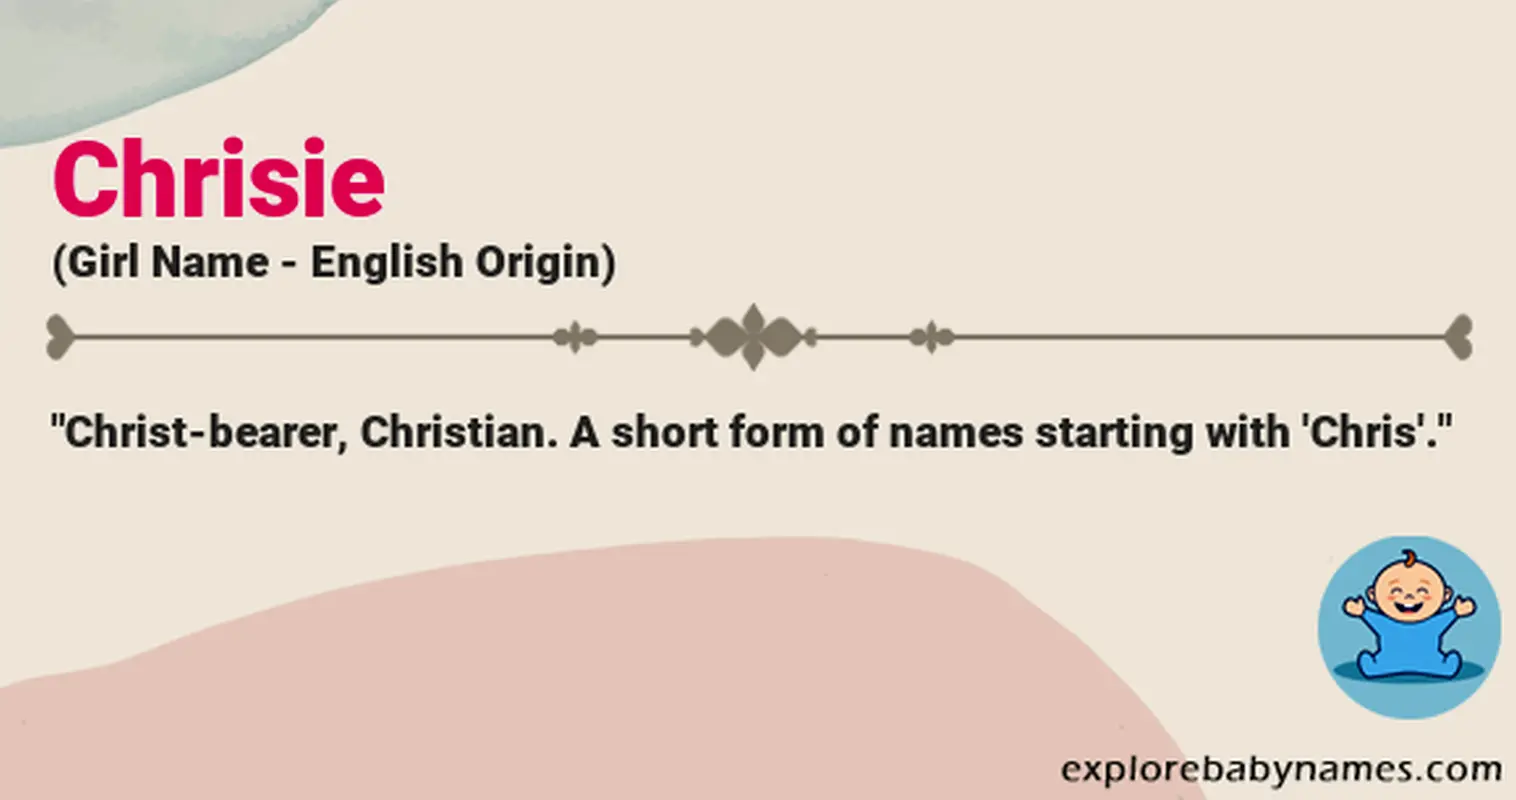 Meaning of Chrisie